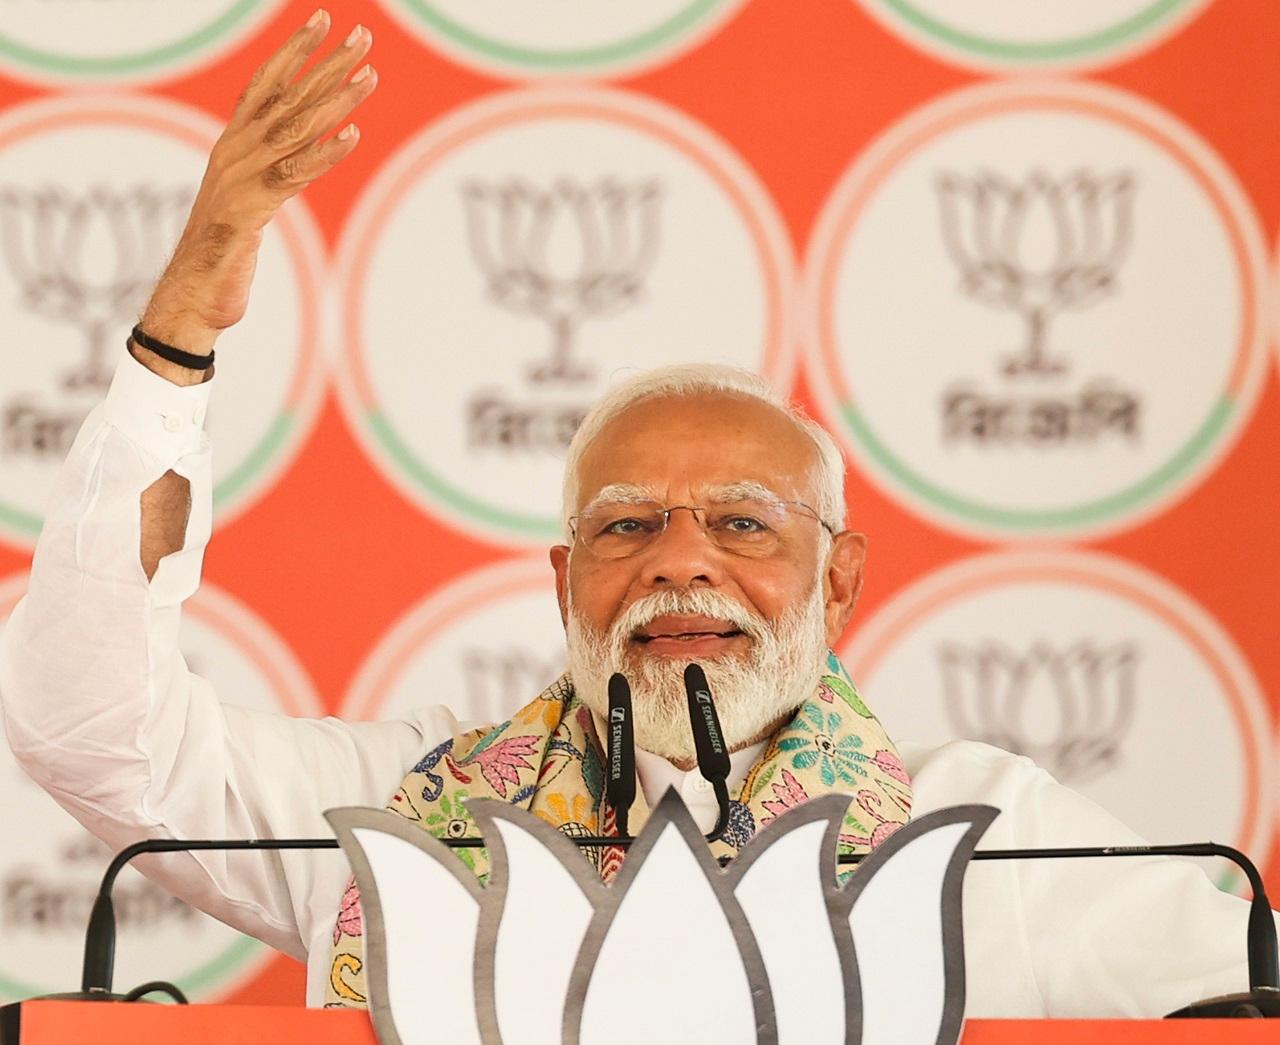 Prime Minister Narendra Modi asserted that Congress' tally in the Lok Sabha polls will be an 